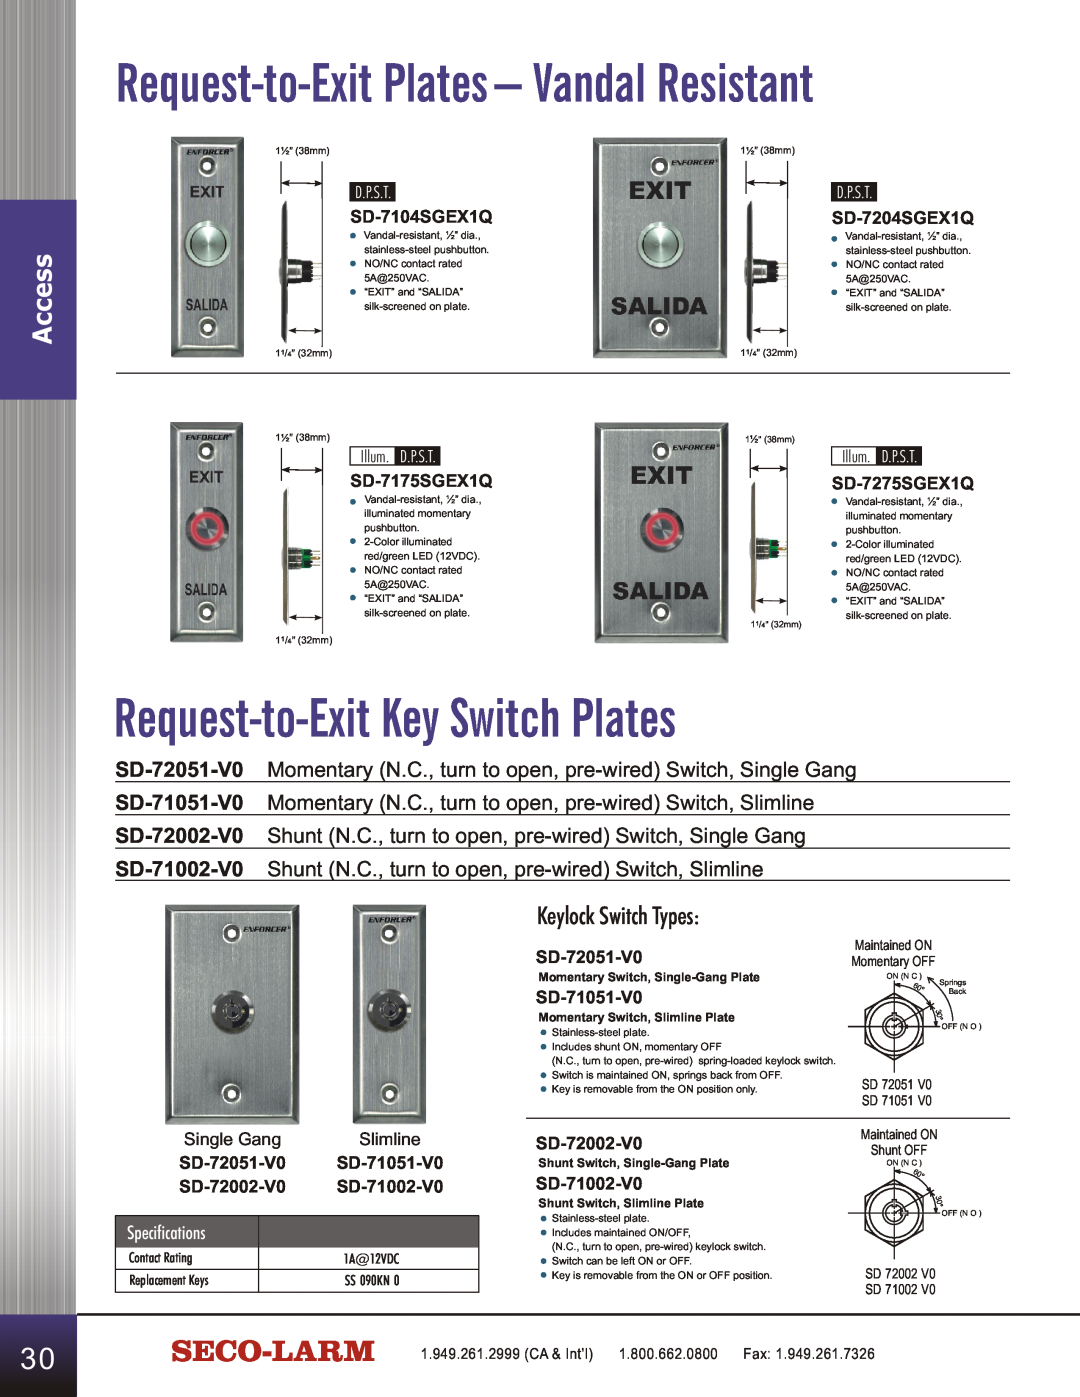 SECO-LARM USA SD-C141S Vandal Resistant, Request-to-ExitKey Switch Plates, Keylock Switch Types, Request-to-ExitPlates 